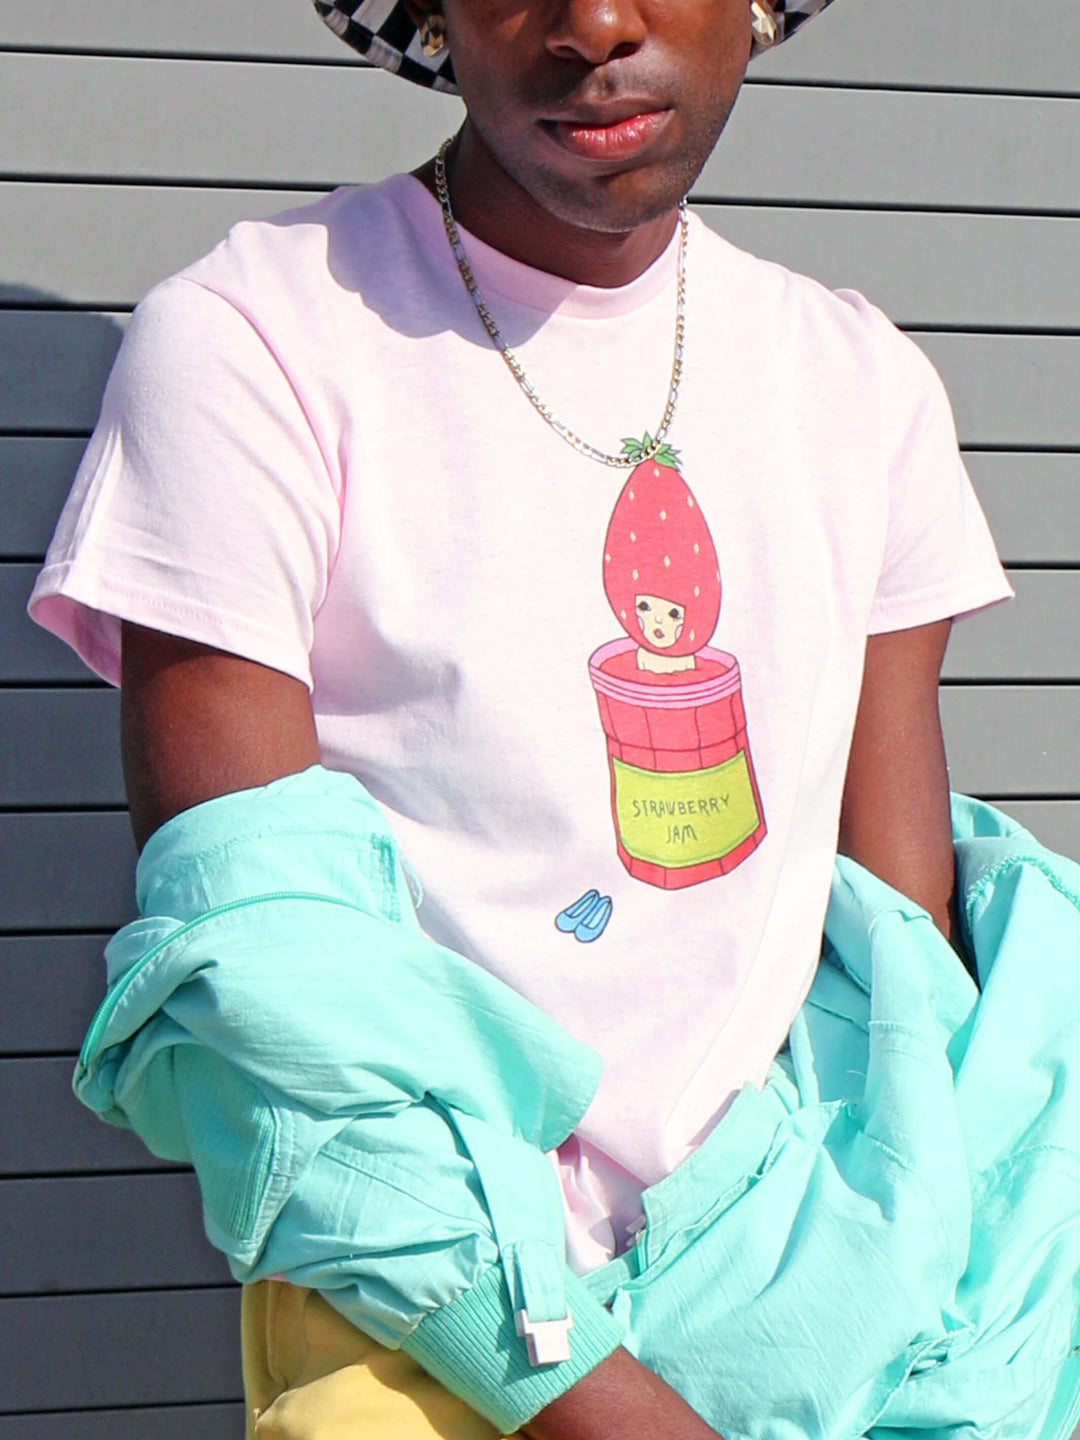 Pink graphic tee with kawaii strawberry by Los Angeles artist Naoshi.